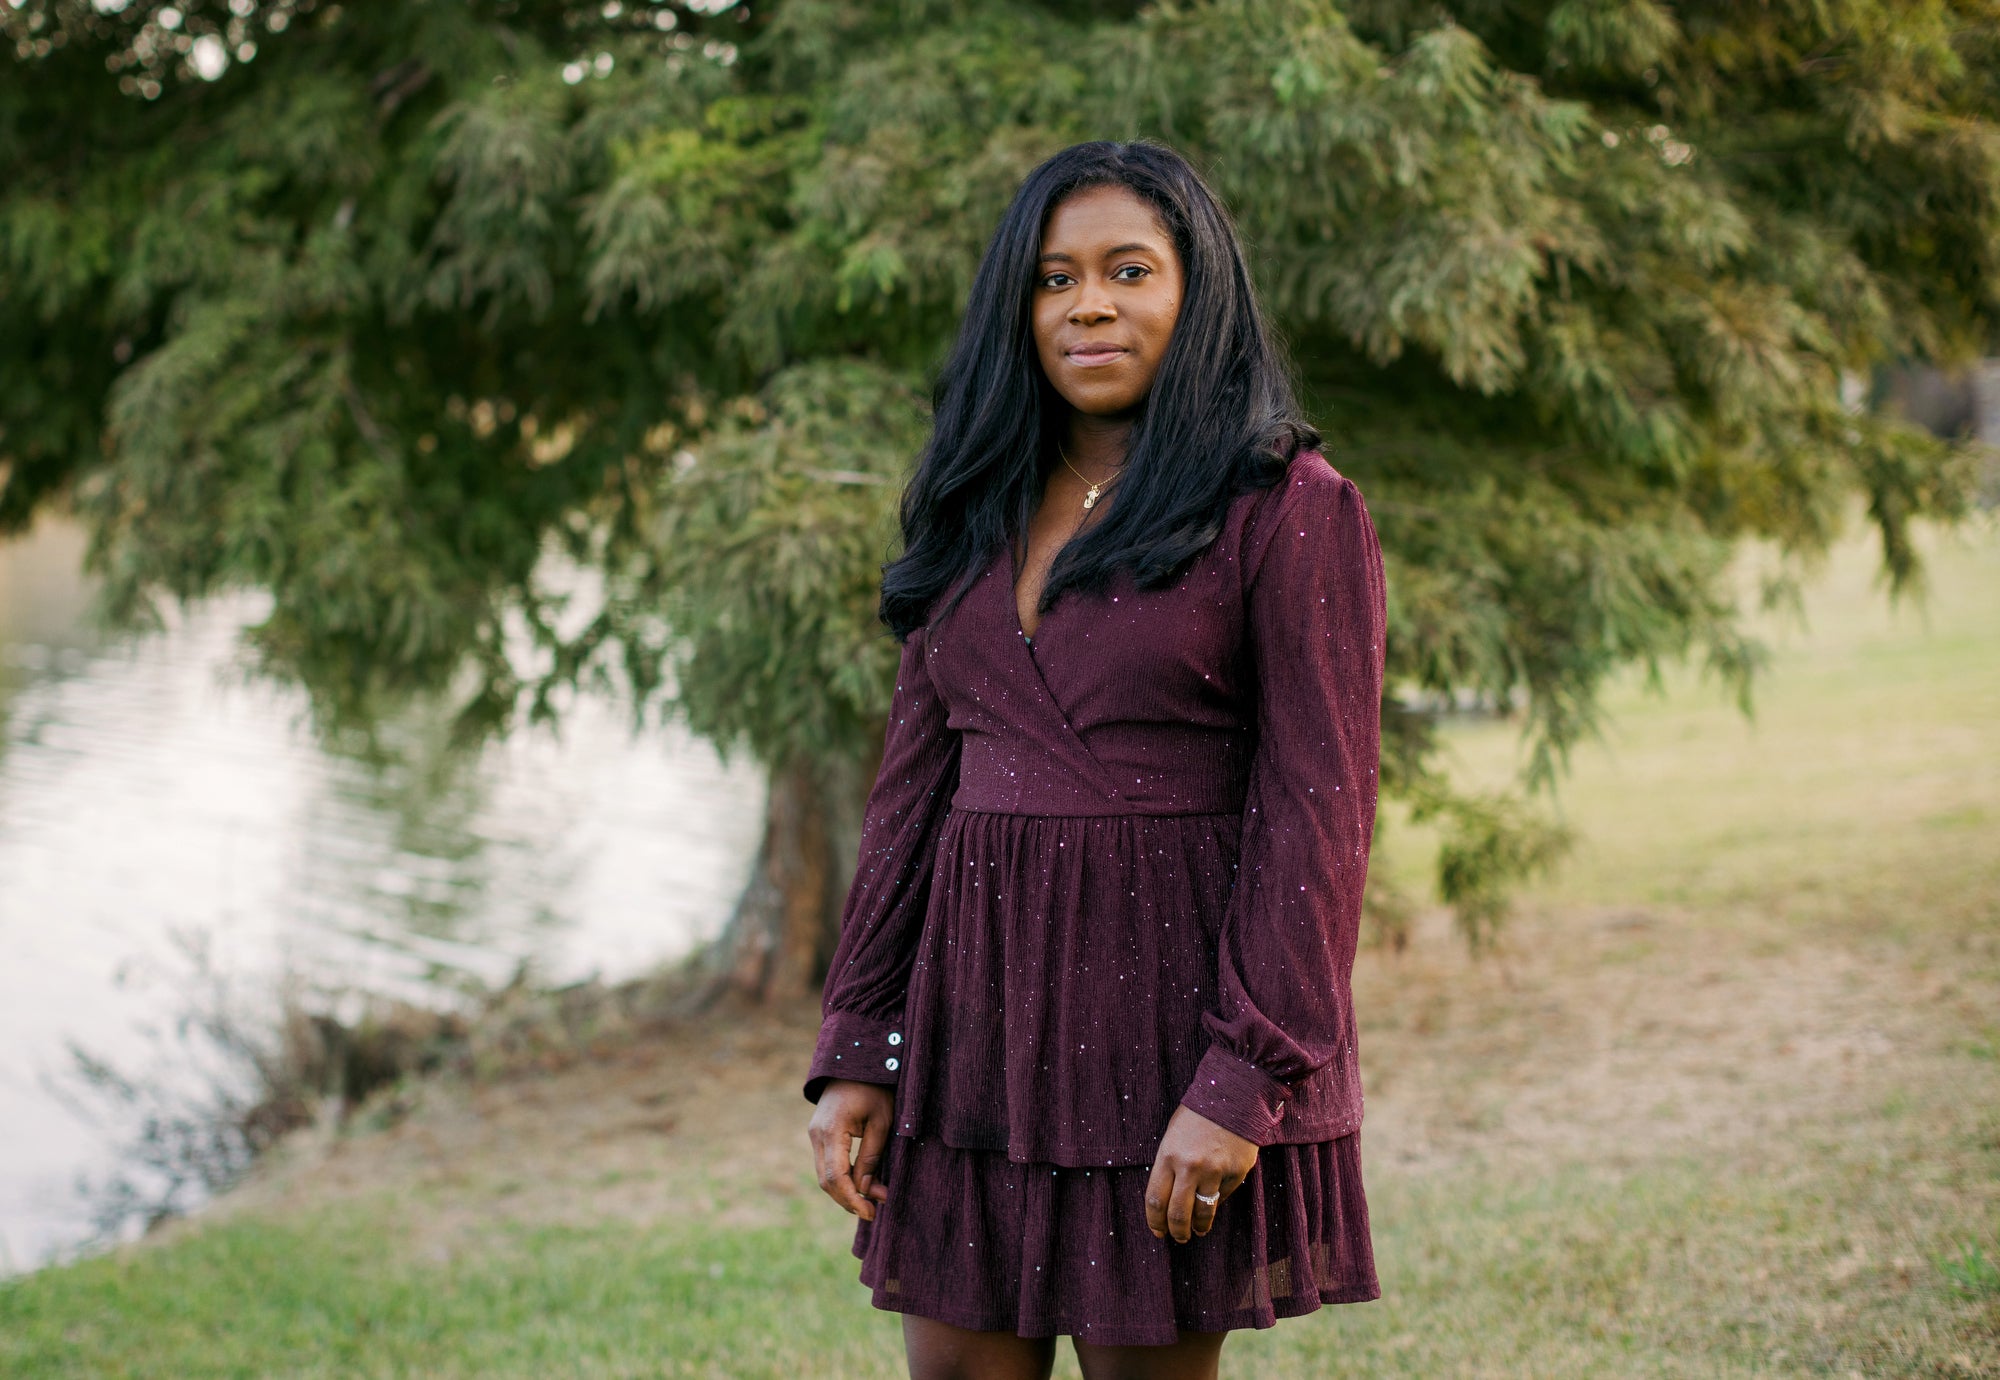 Kaitlyn Joshua, an organizer with Earthworks, photographed at her home in Ascension Parish.